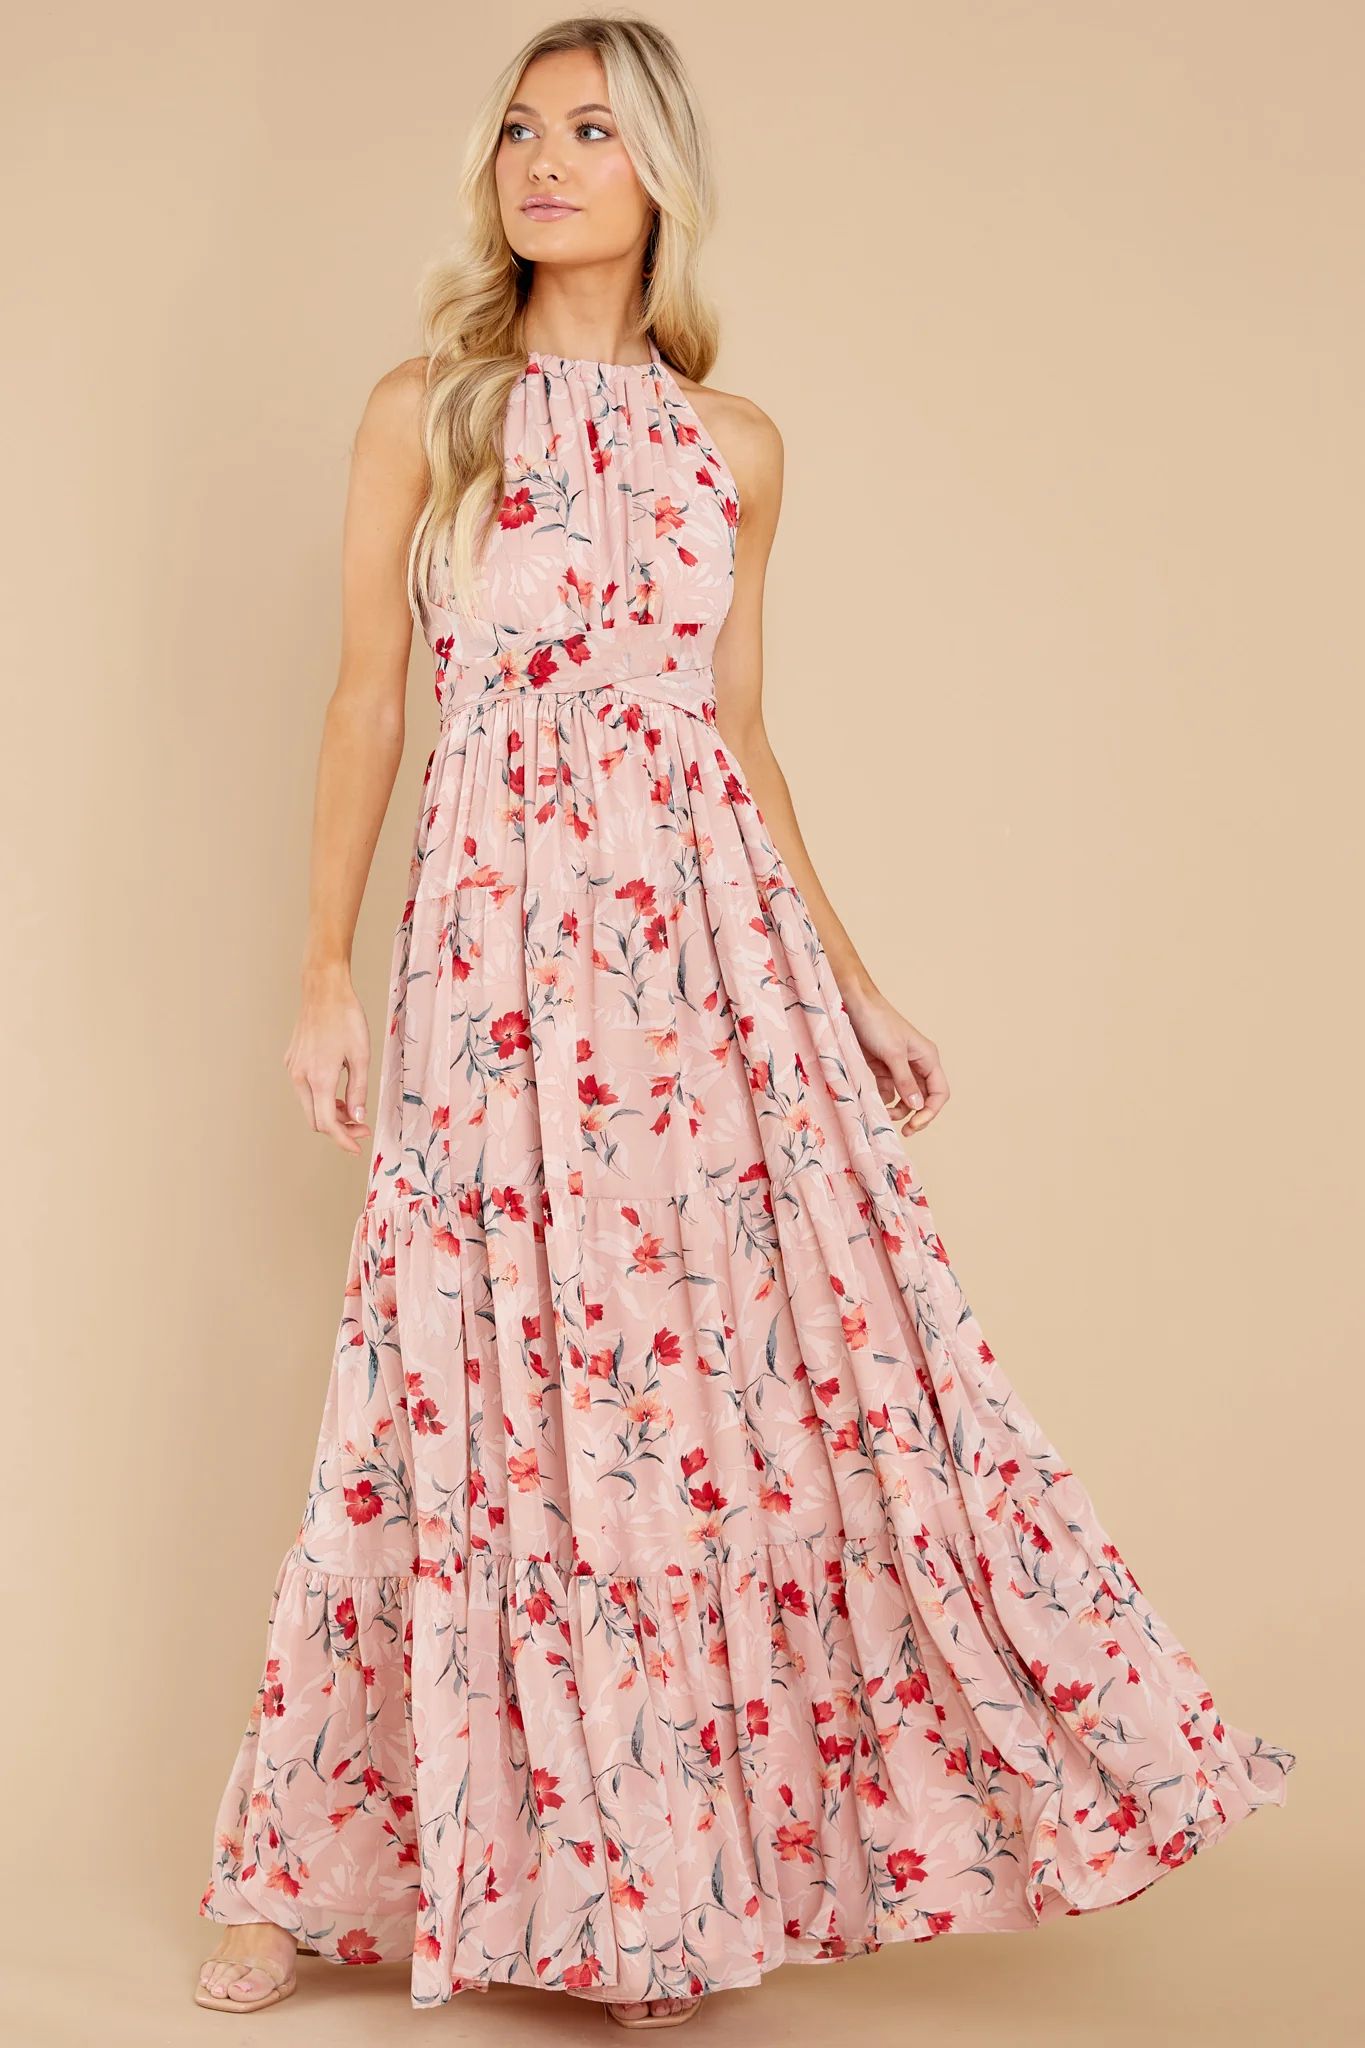 Heat Of The Moment Blush Floral Print Maxi Dress | Red Dress 